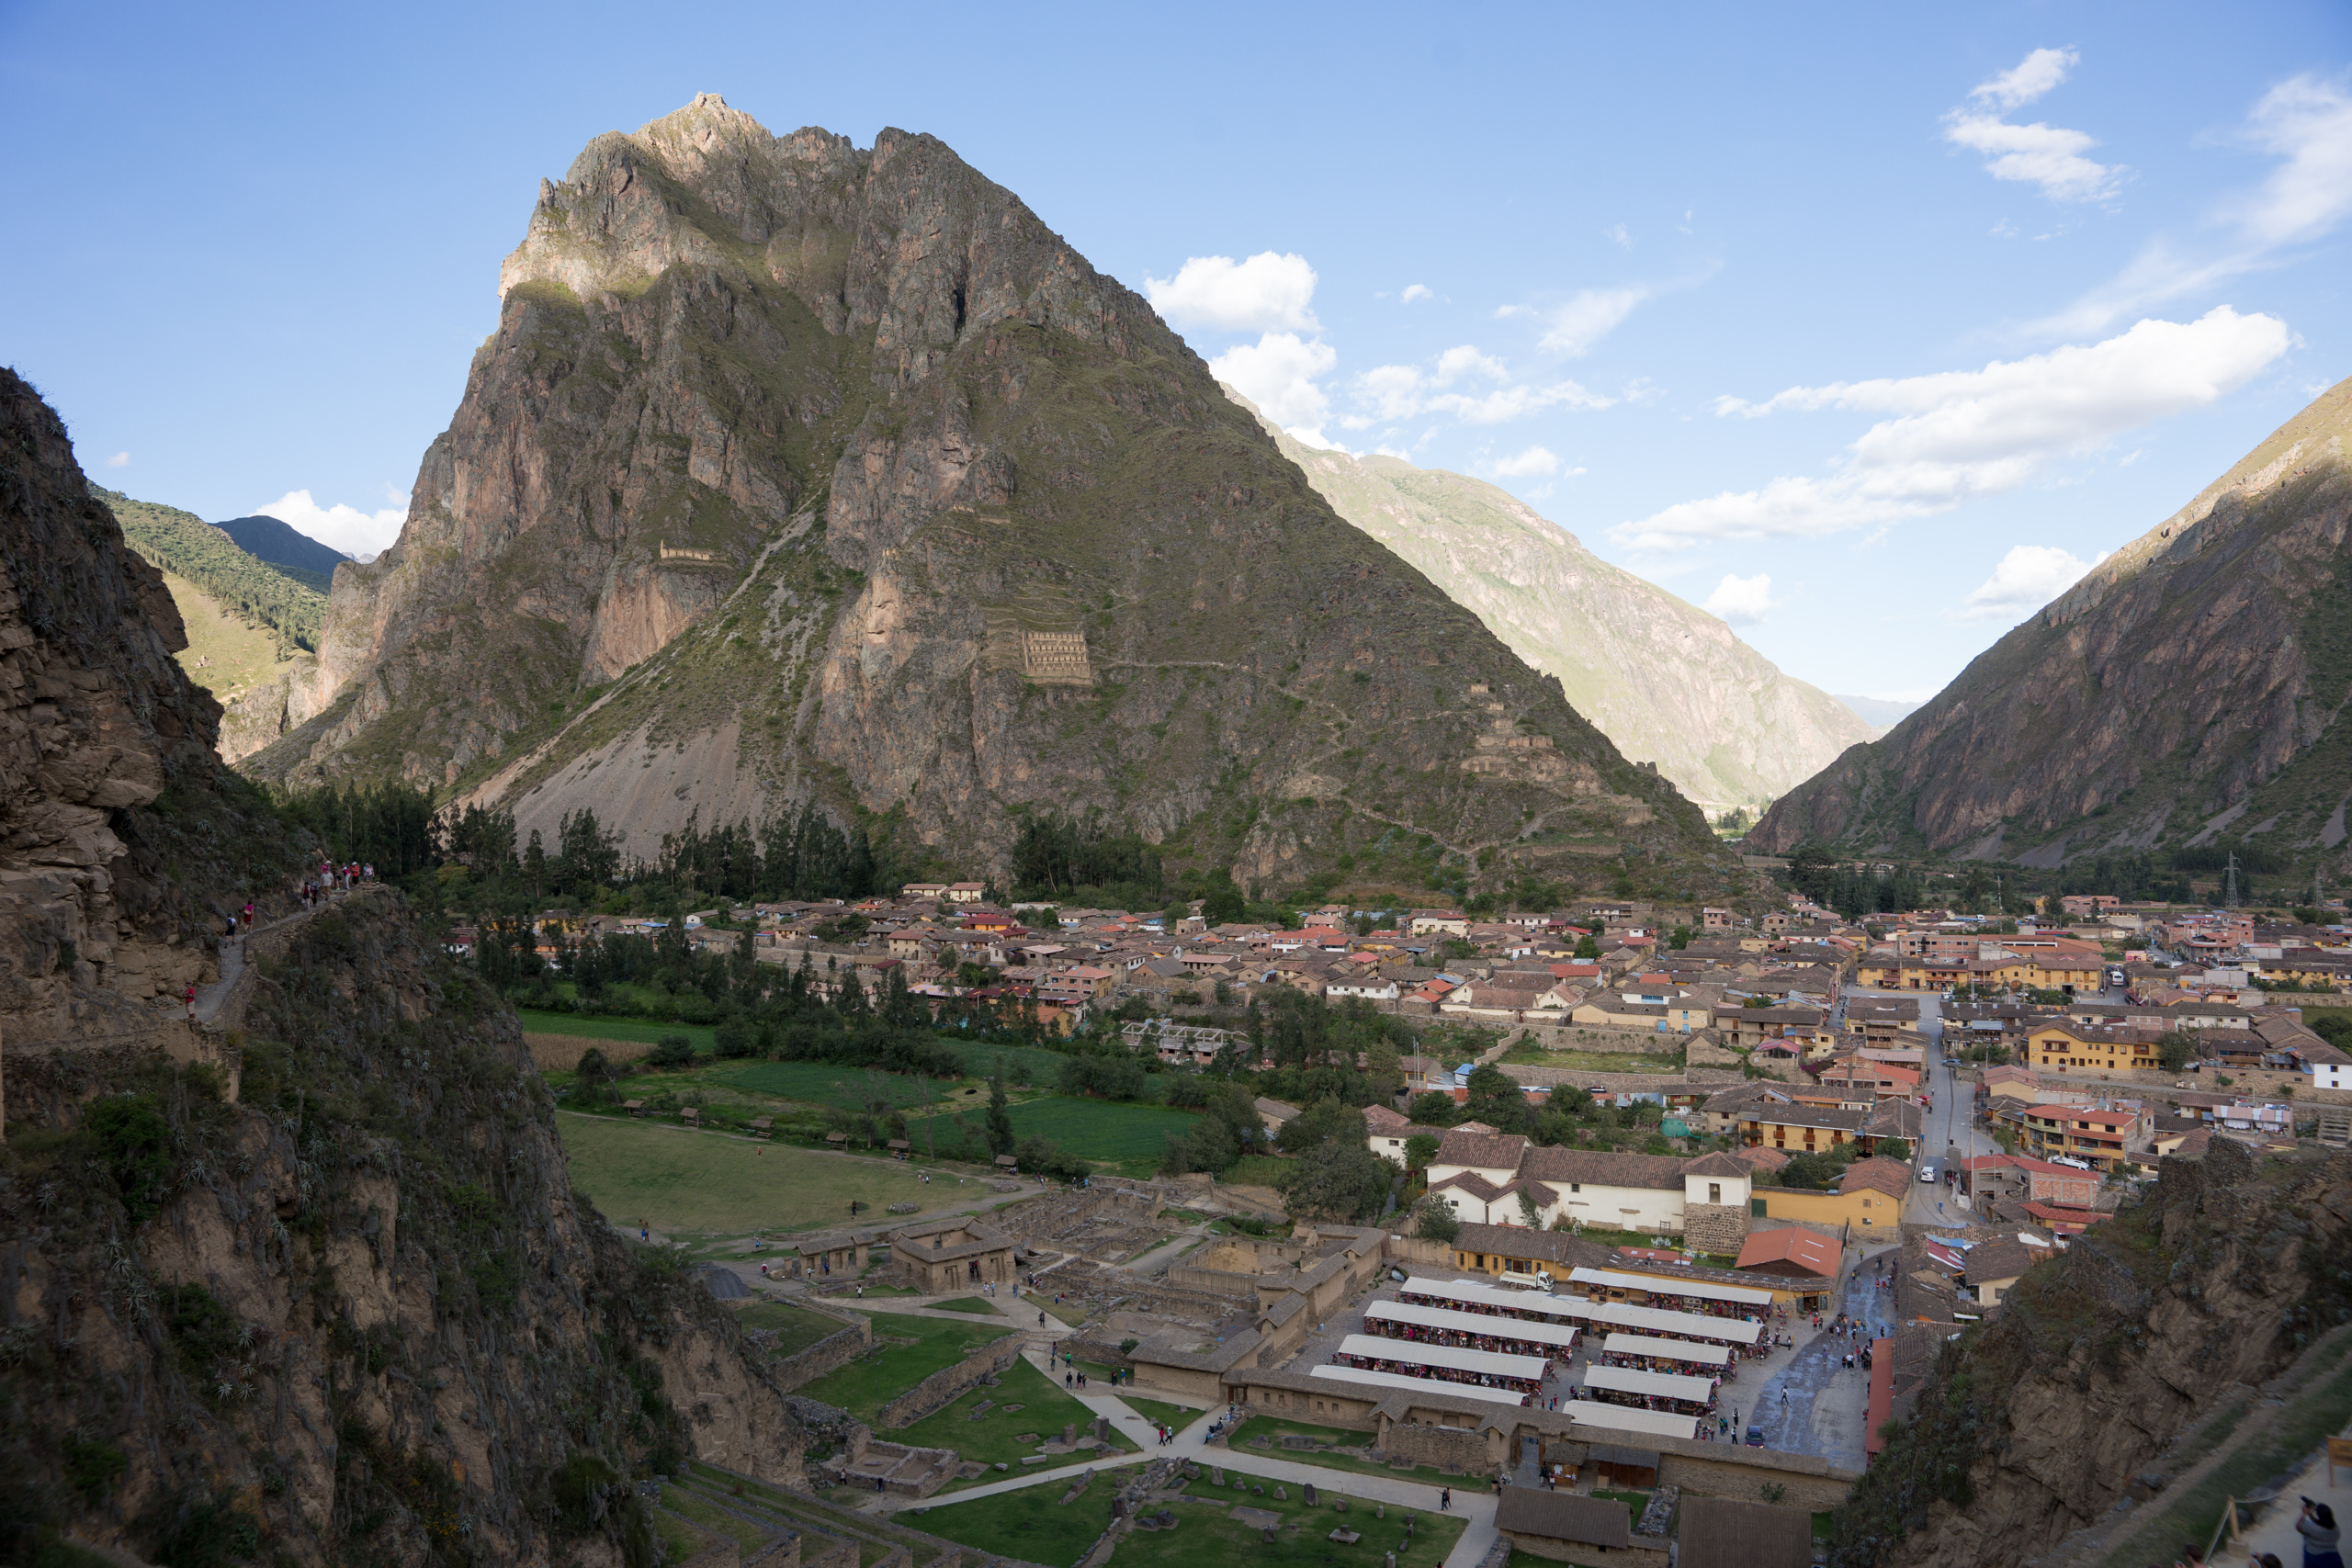 The town of Ollantaytambo.  On the opposite mountain the Inca constructed storage buildings.